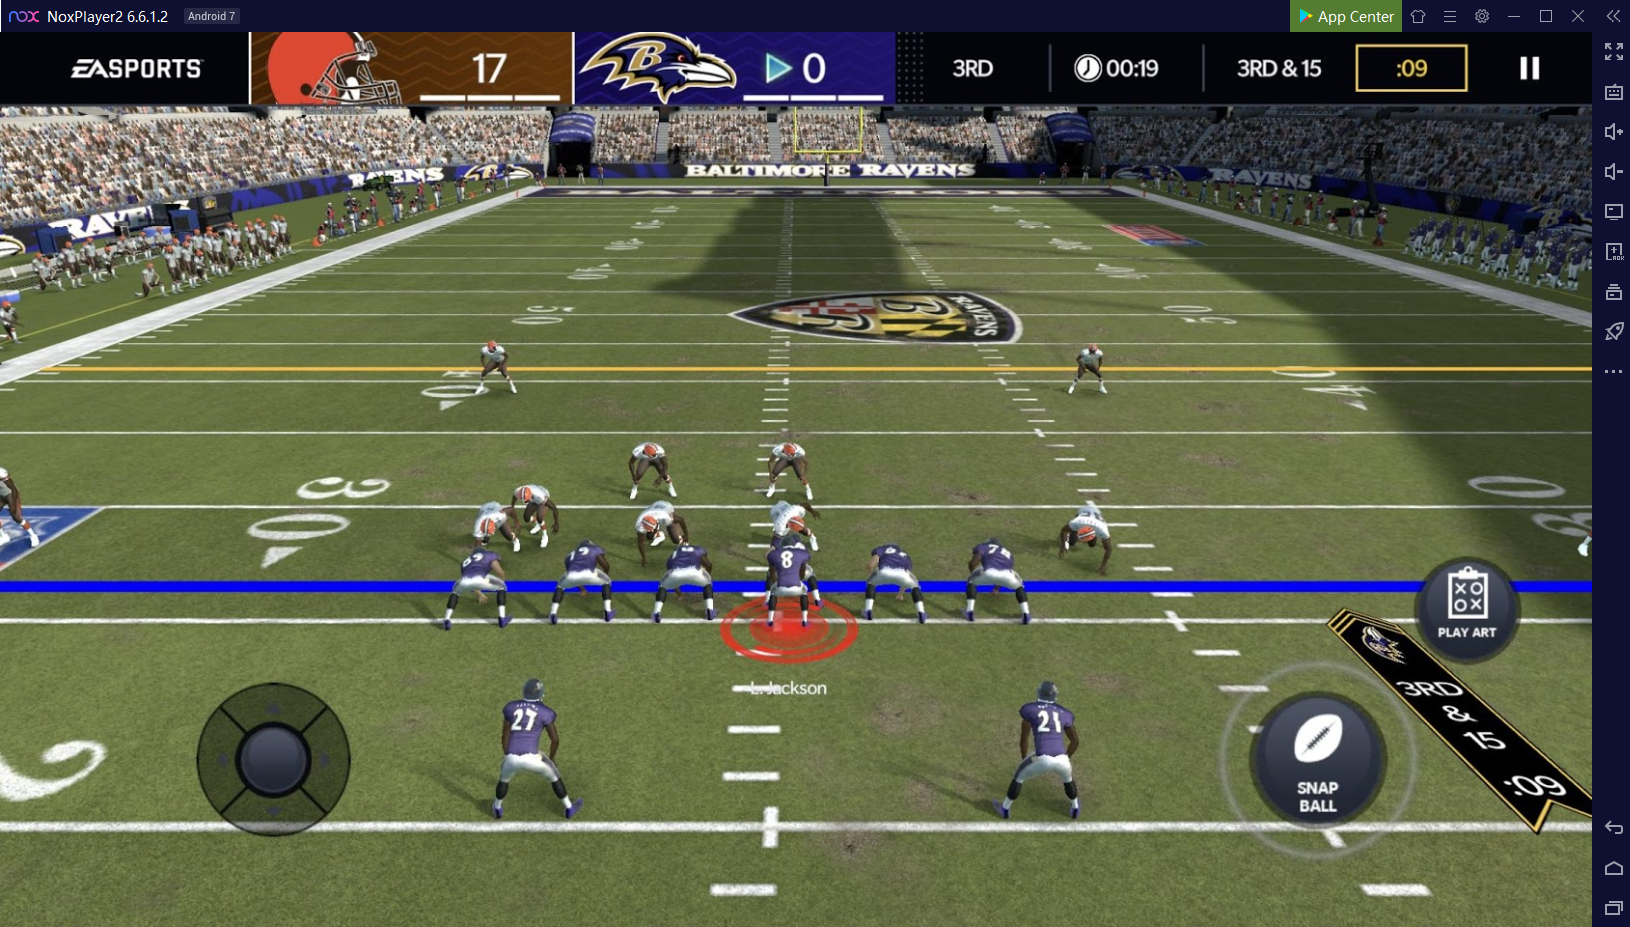 Download and play Madden NFL 21 Mobile Football on PC with NoxPlayer